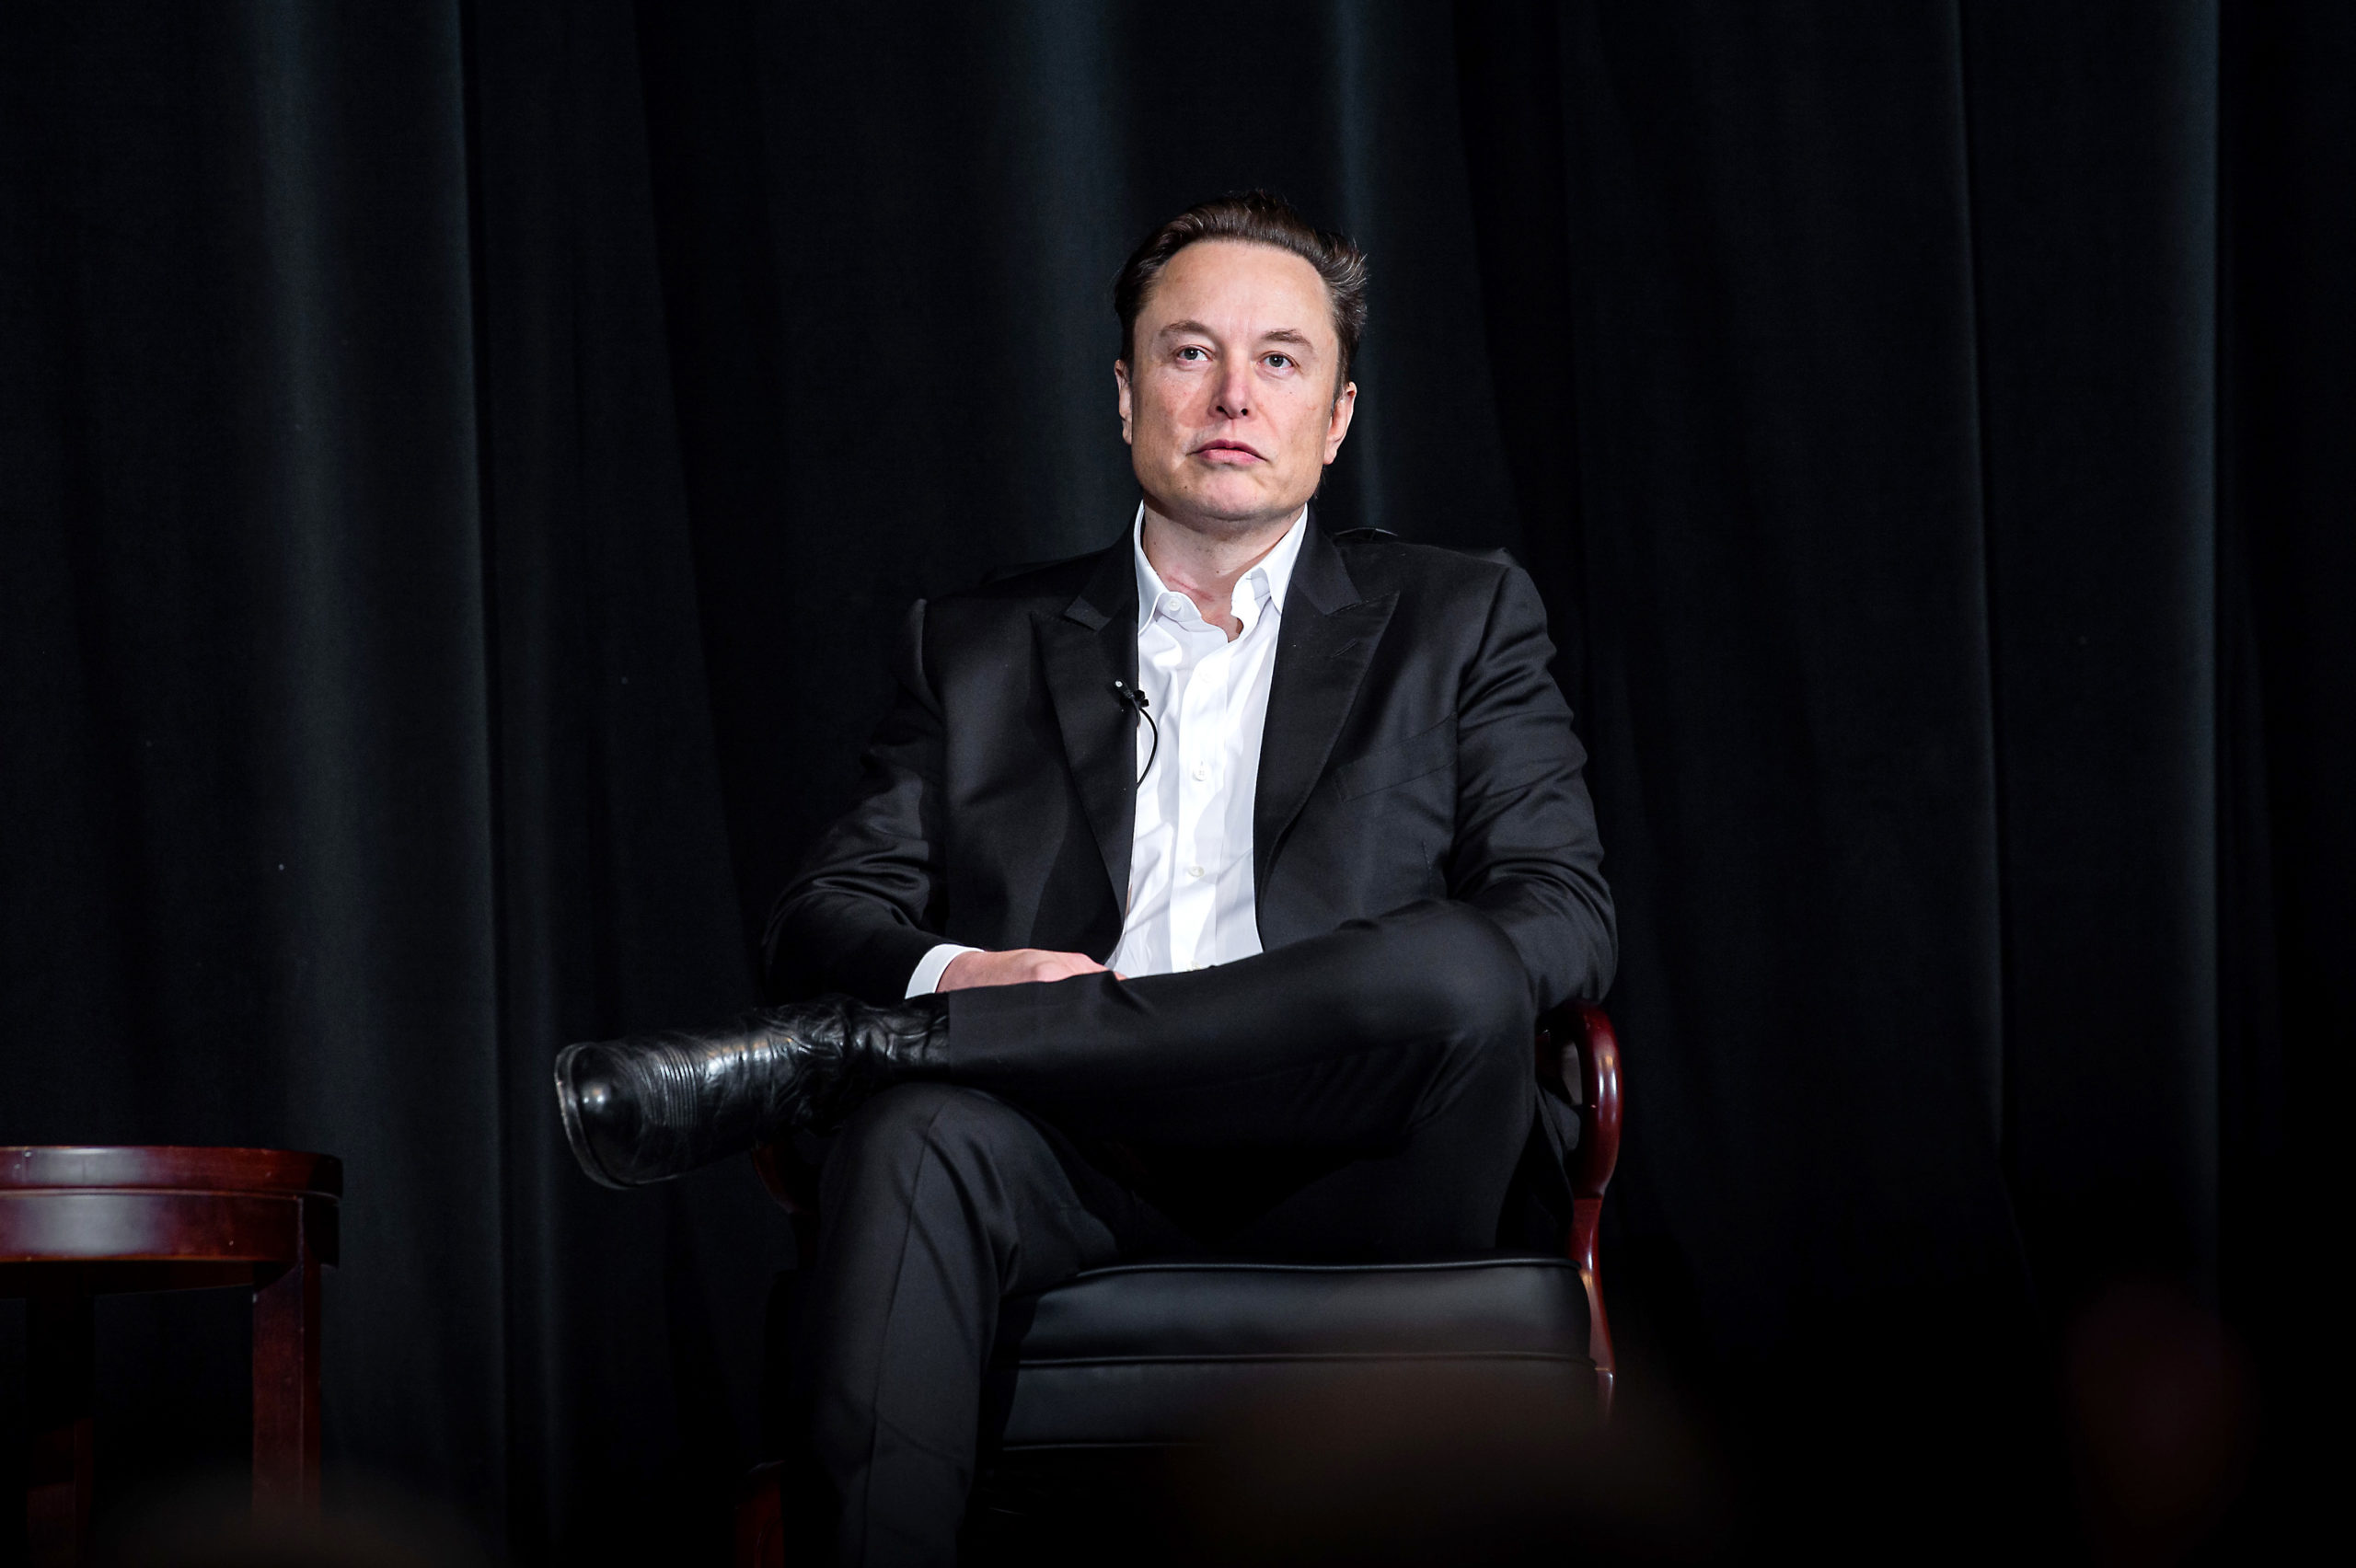 Public Enemy Number One?: Elon Musk Biography Review